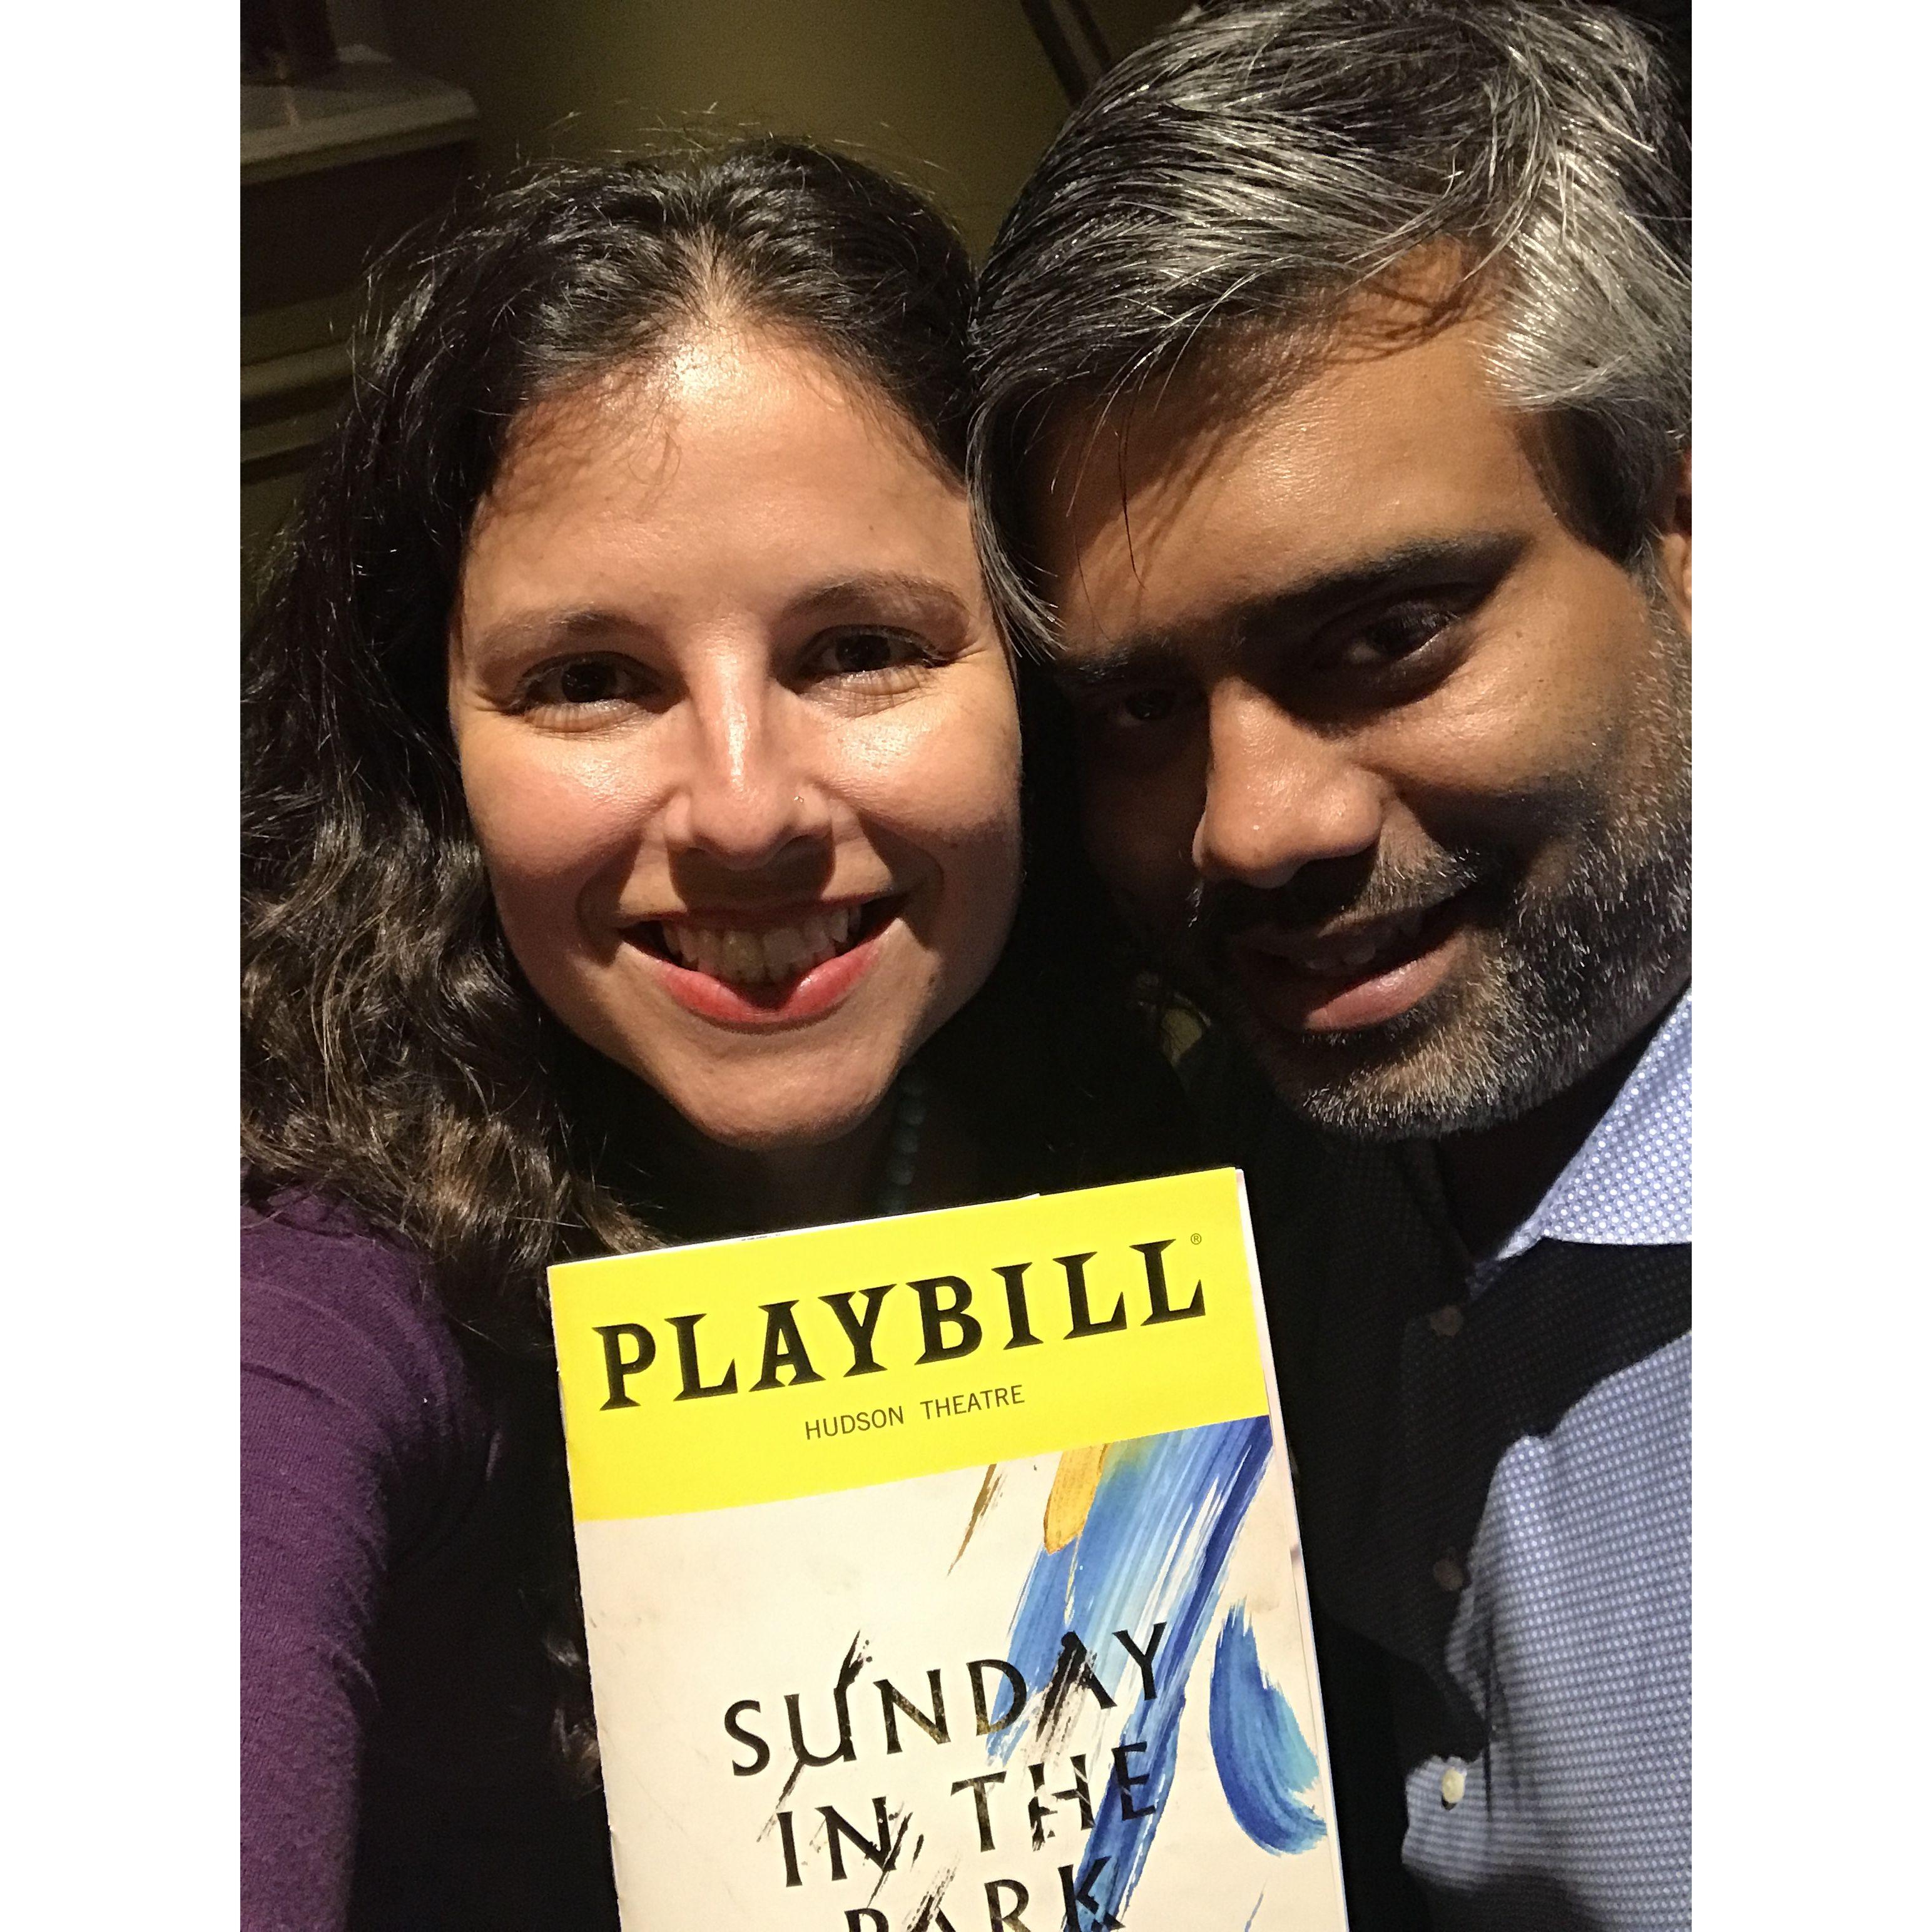 "Sunday in the Park with George" on Broadway 2017